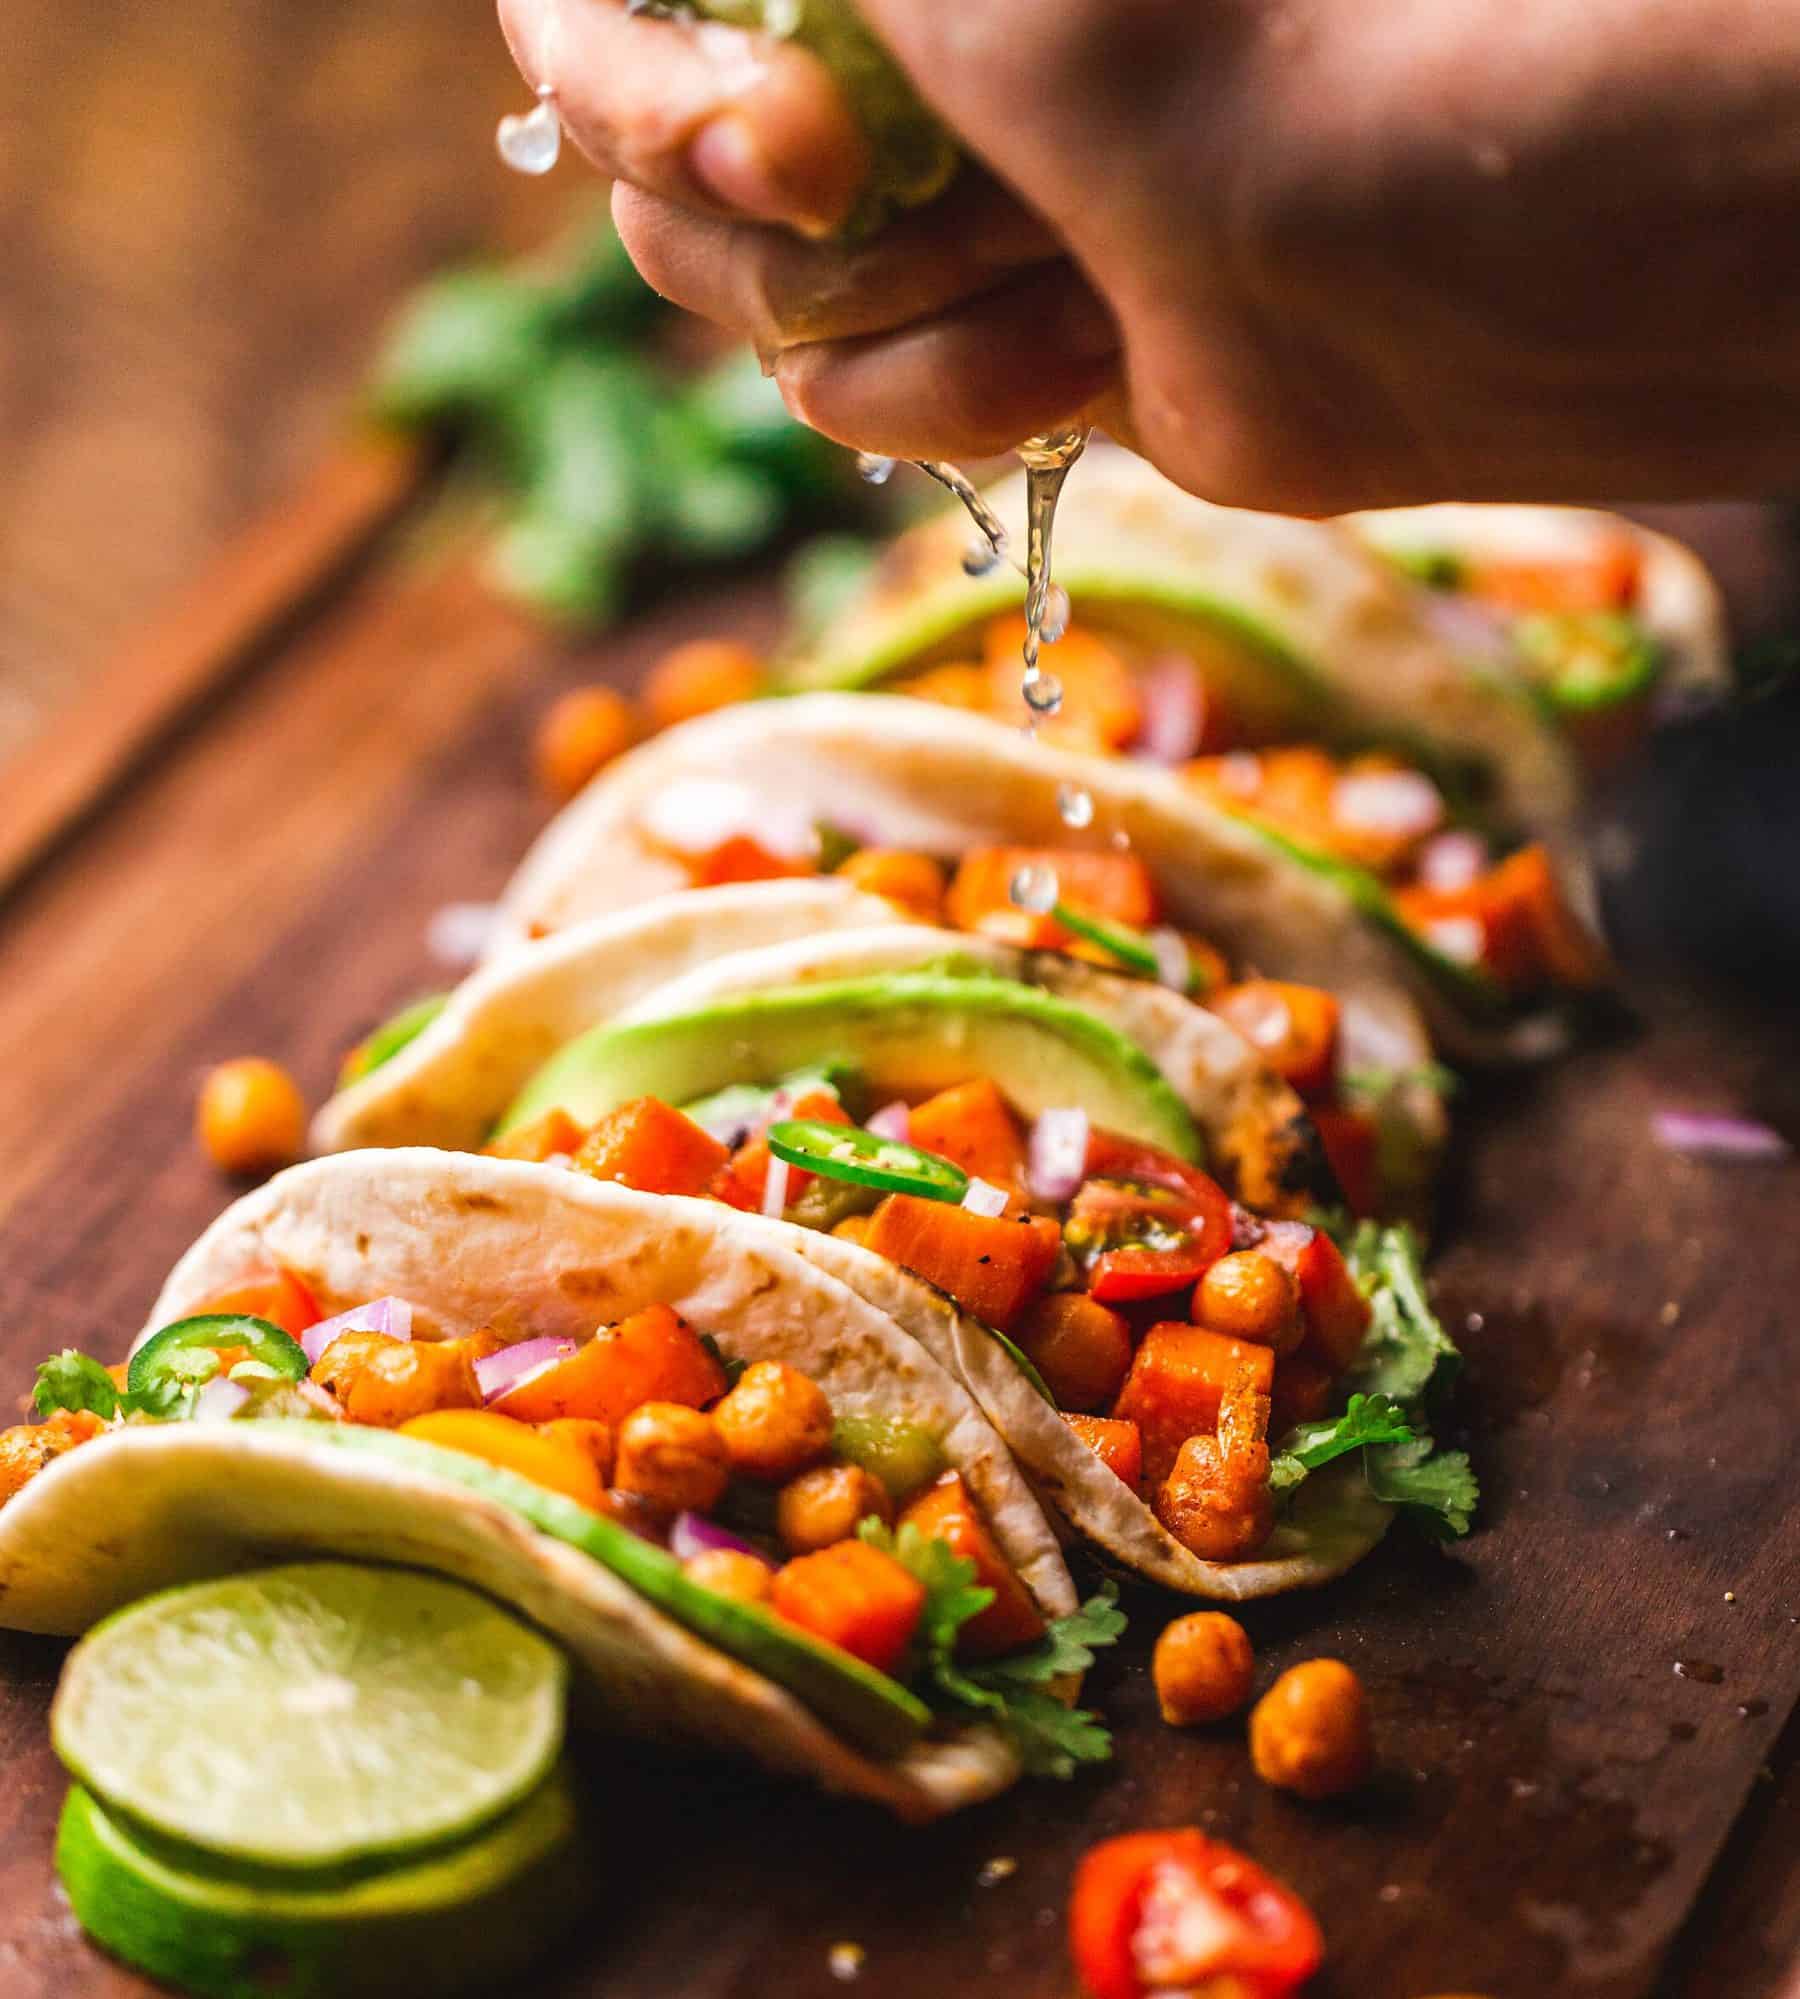 photo shows a hand squeezing a lime over multiple tacos filled with veggies. the background is a blurred wooden table. the foreground is the hand and tacos